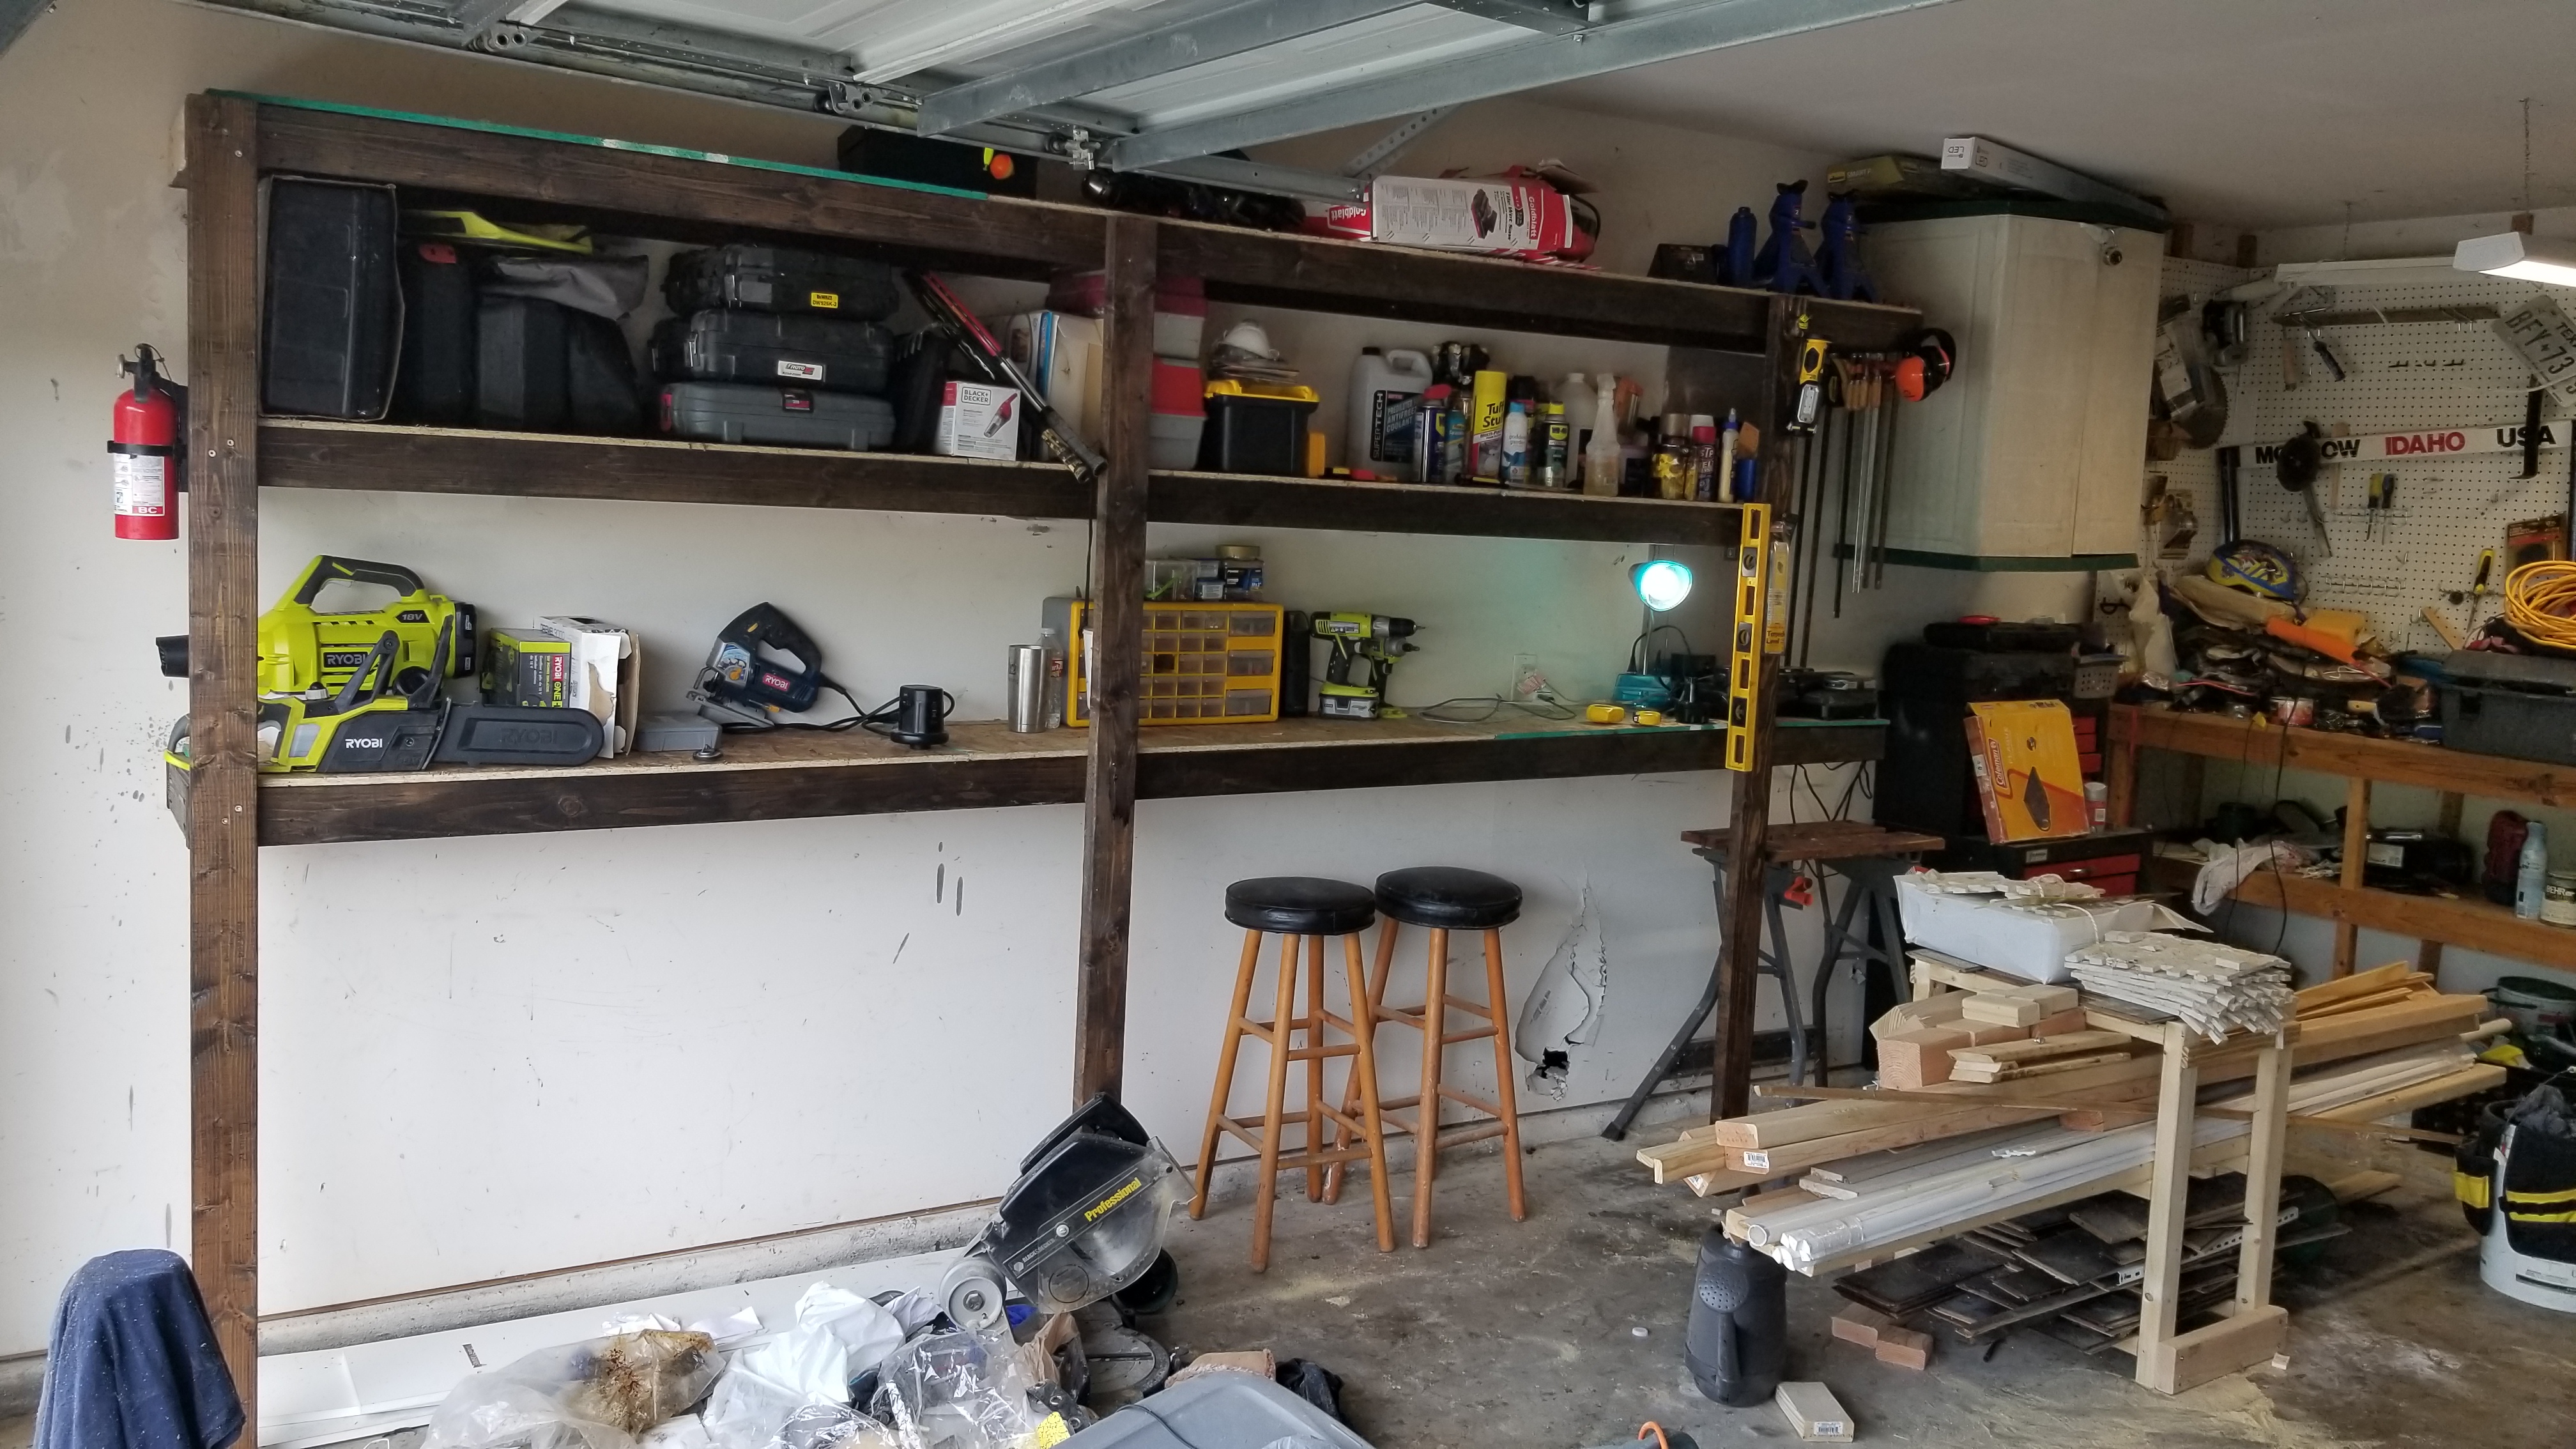 Look at my Finished $80 Garage Shelves